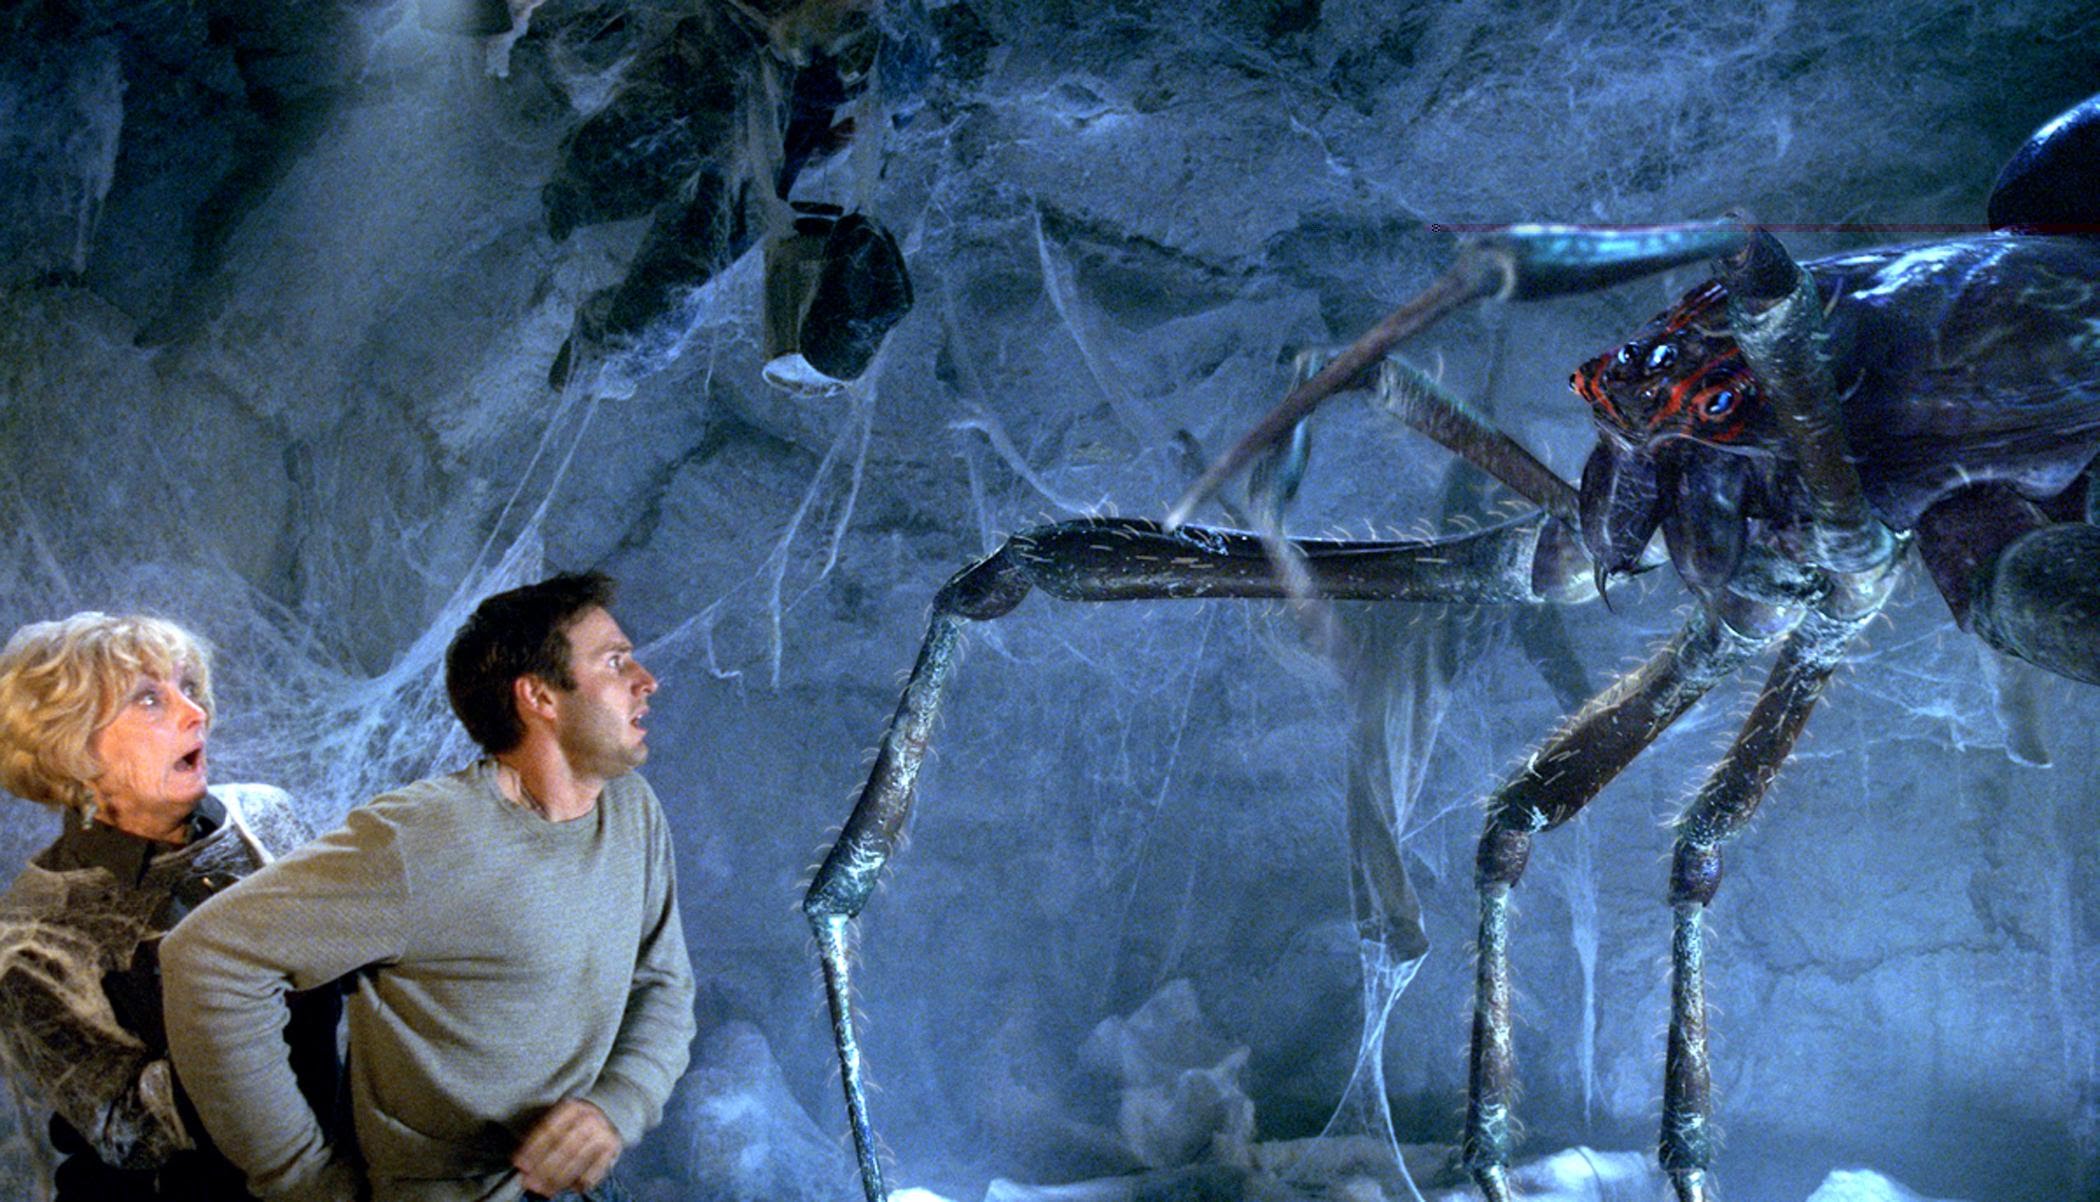 Eight Legged Freaks' Remains a Criminally Overlooked Horror Comedy - Bloody Disgusting